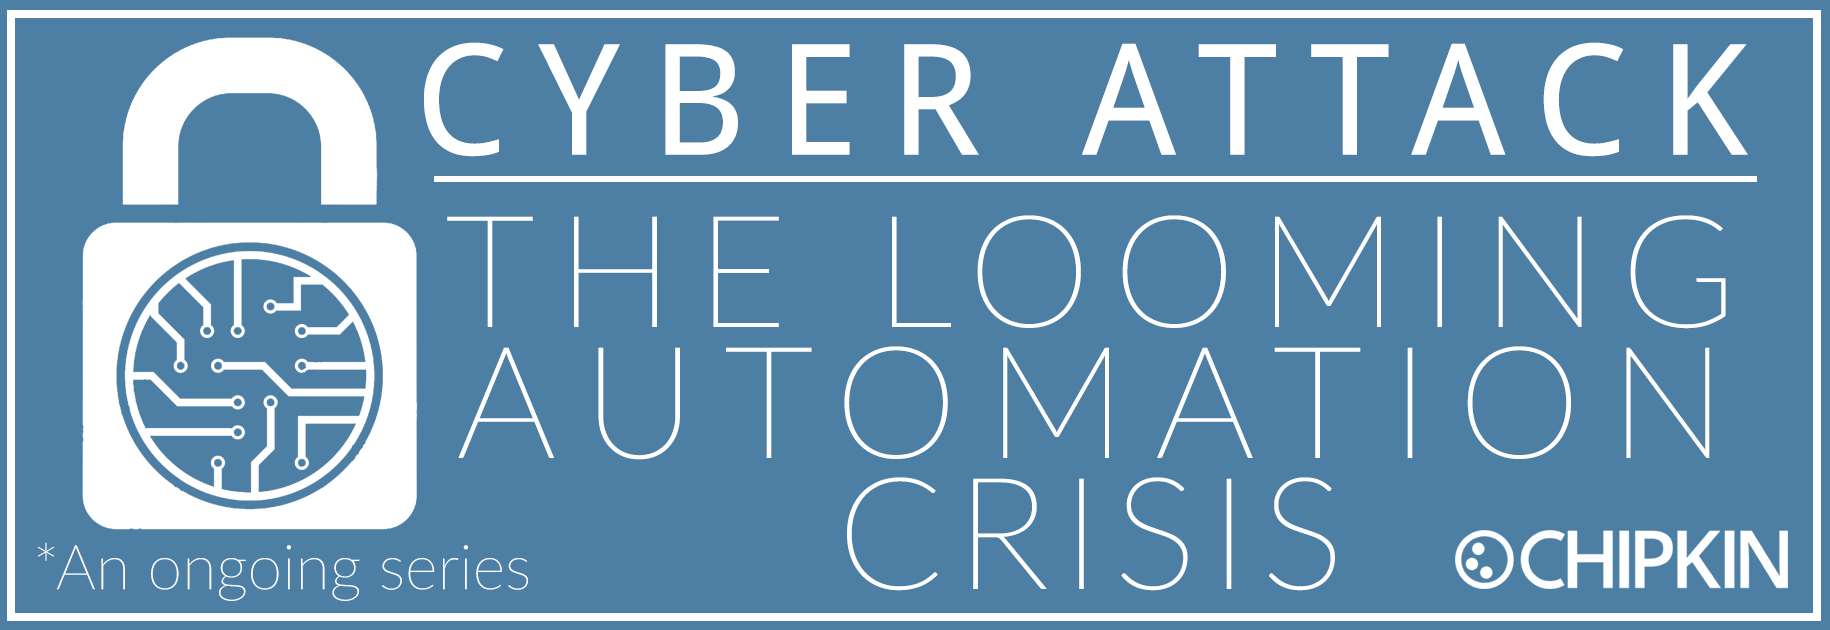 https://cdn.chipkin.com/assets/uploads/2018/Jul/Newsletter - Cyber Attack The Looming Automation Crisis_03-14-54-23_24-11-32-37.png